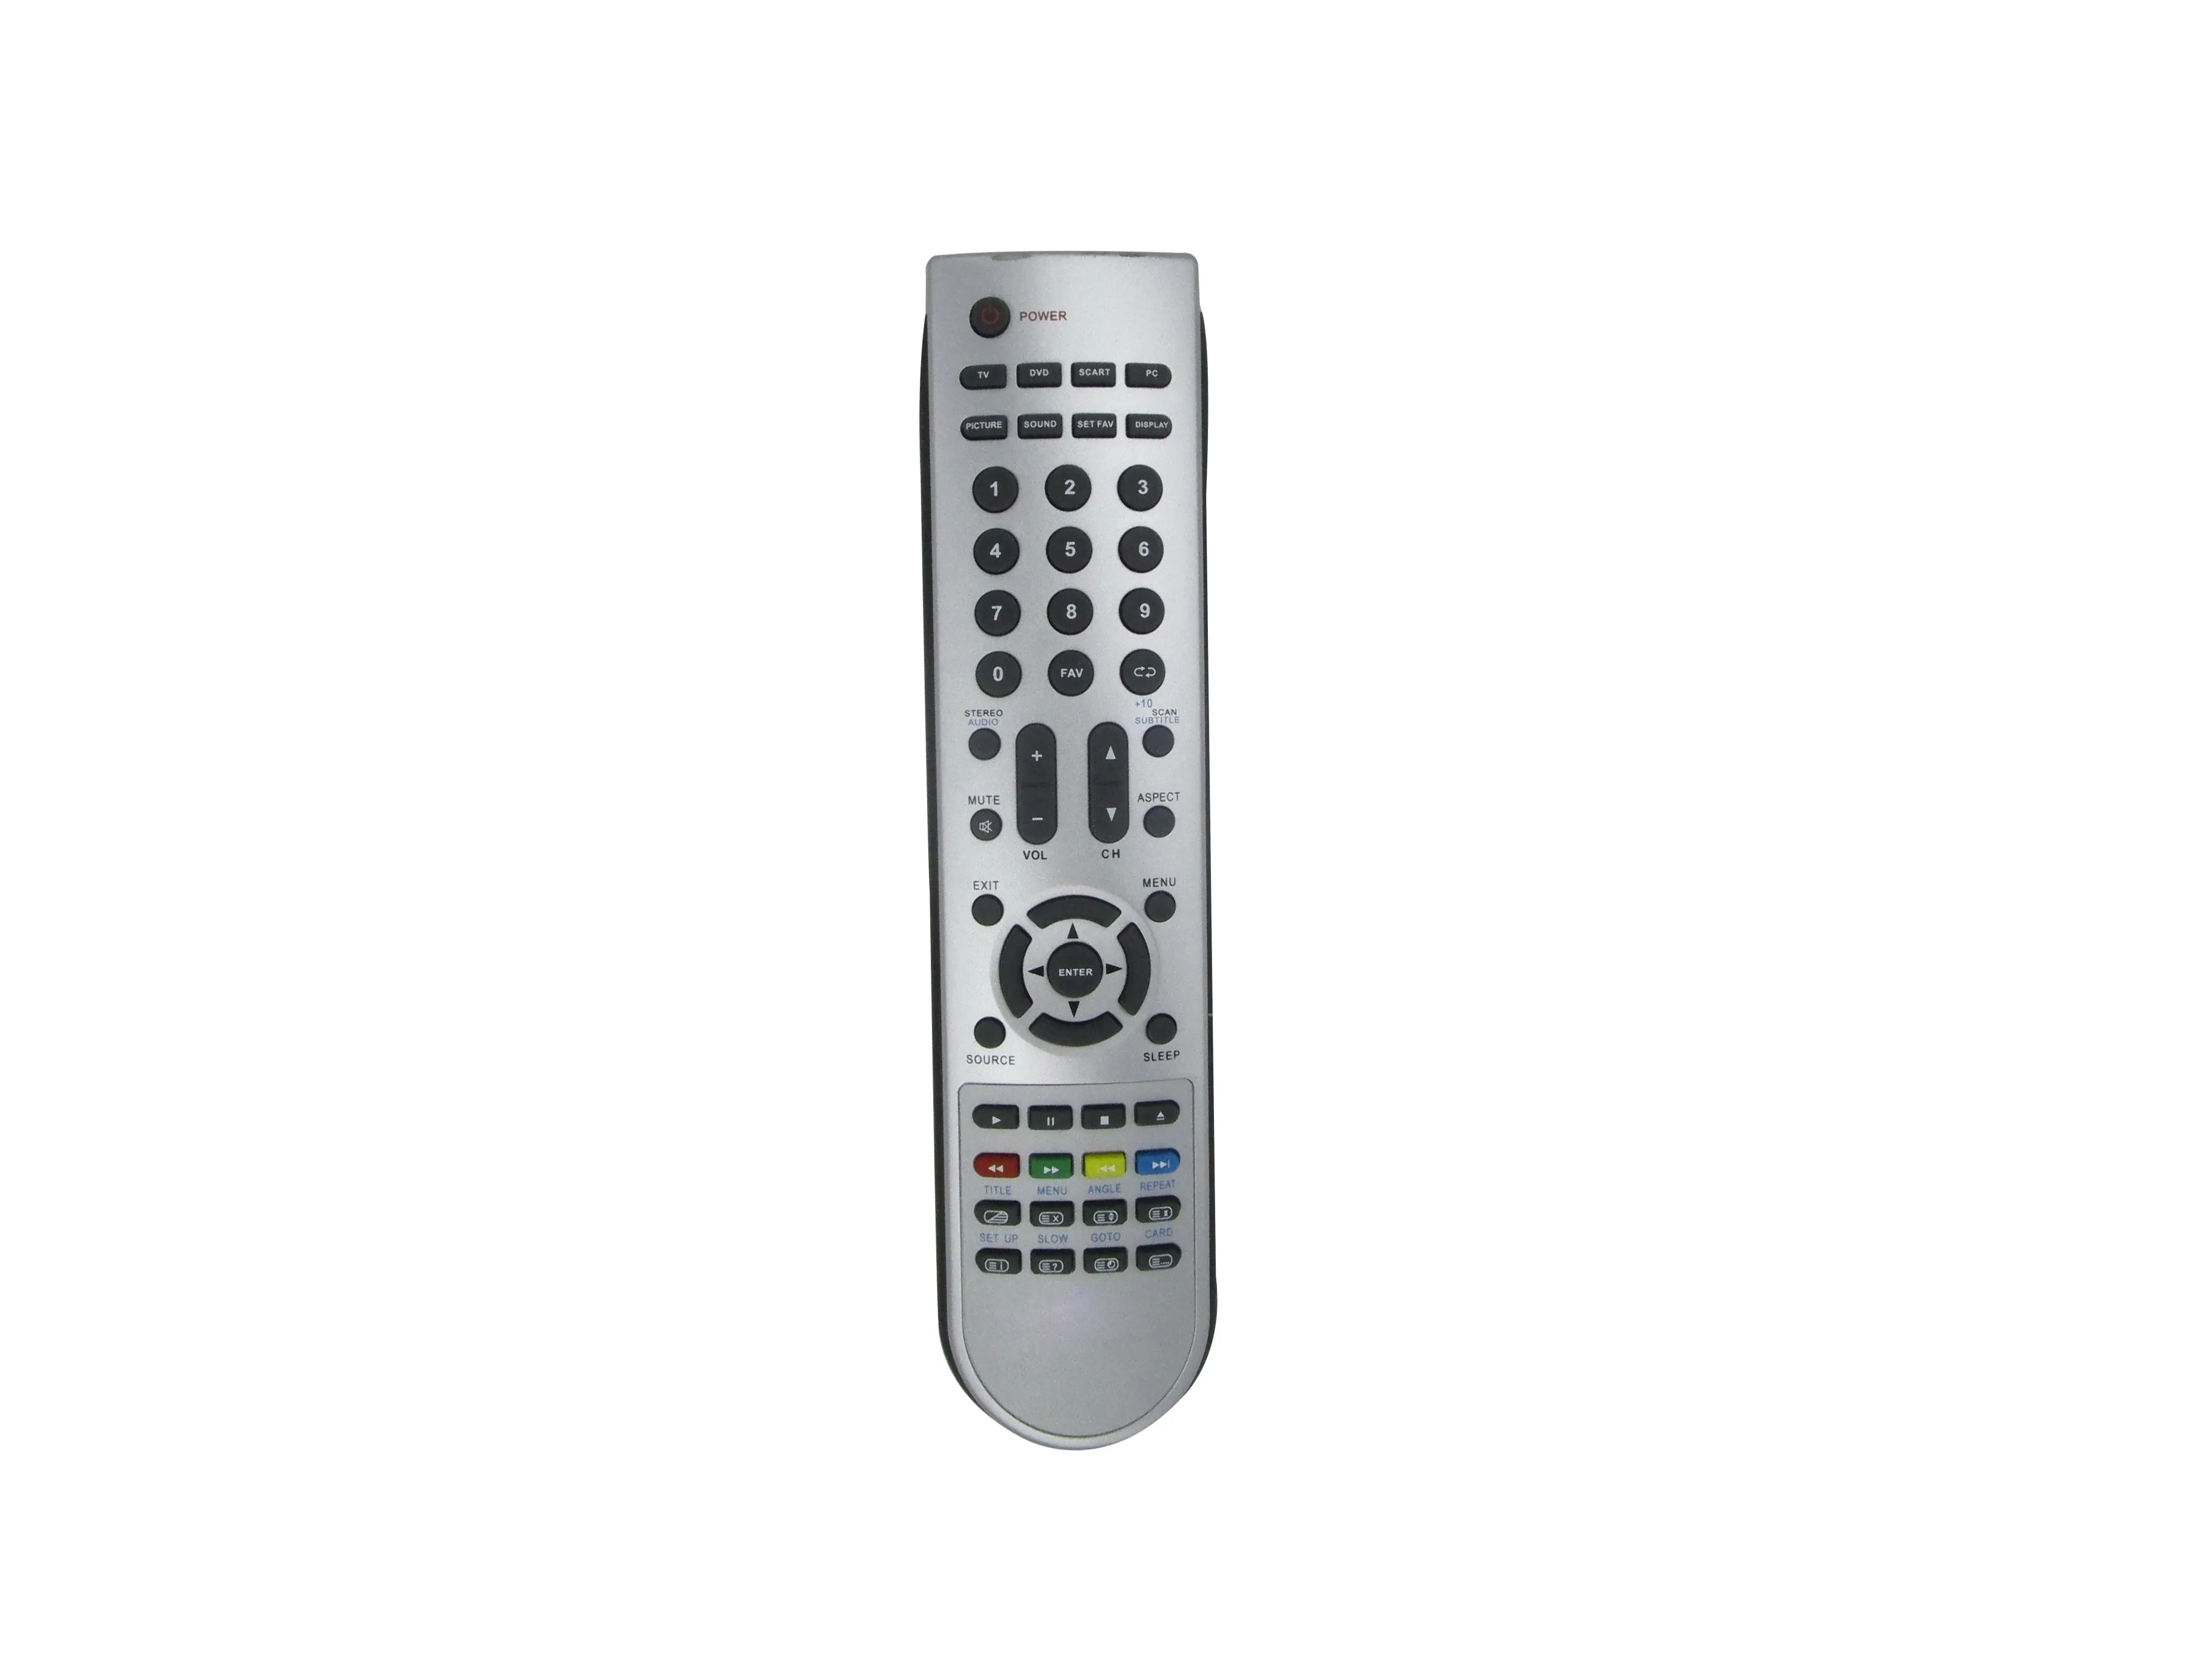 Remote Control Smart Lcd Led Hdtv Tv For Teac Rc-6182 Rc-6192 Lcdv1955Hd Lcdv2255Hd Lcdv2255Hdw Lcdv2655Hd Lcdv3255Hd Rc-6085 Lcdv1901M Rc-6095 Lcdv1501M